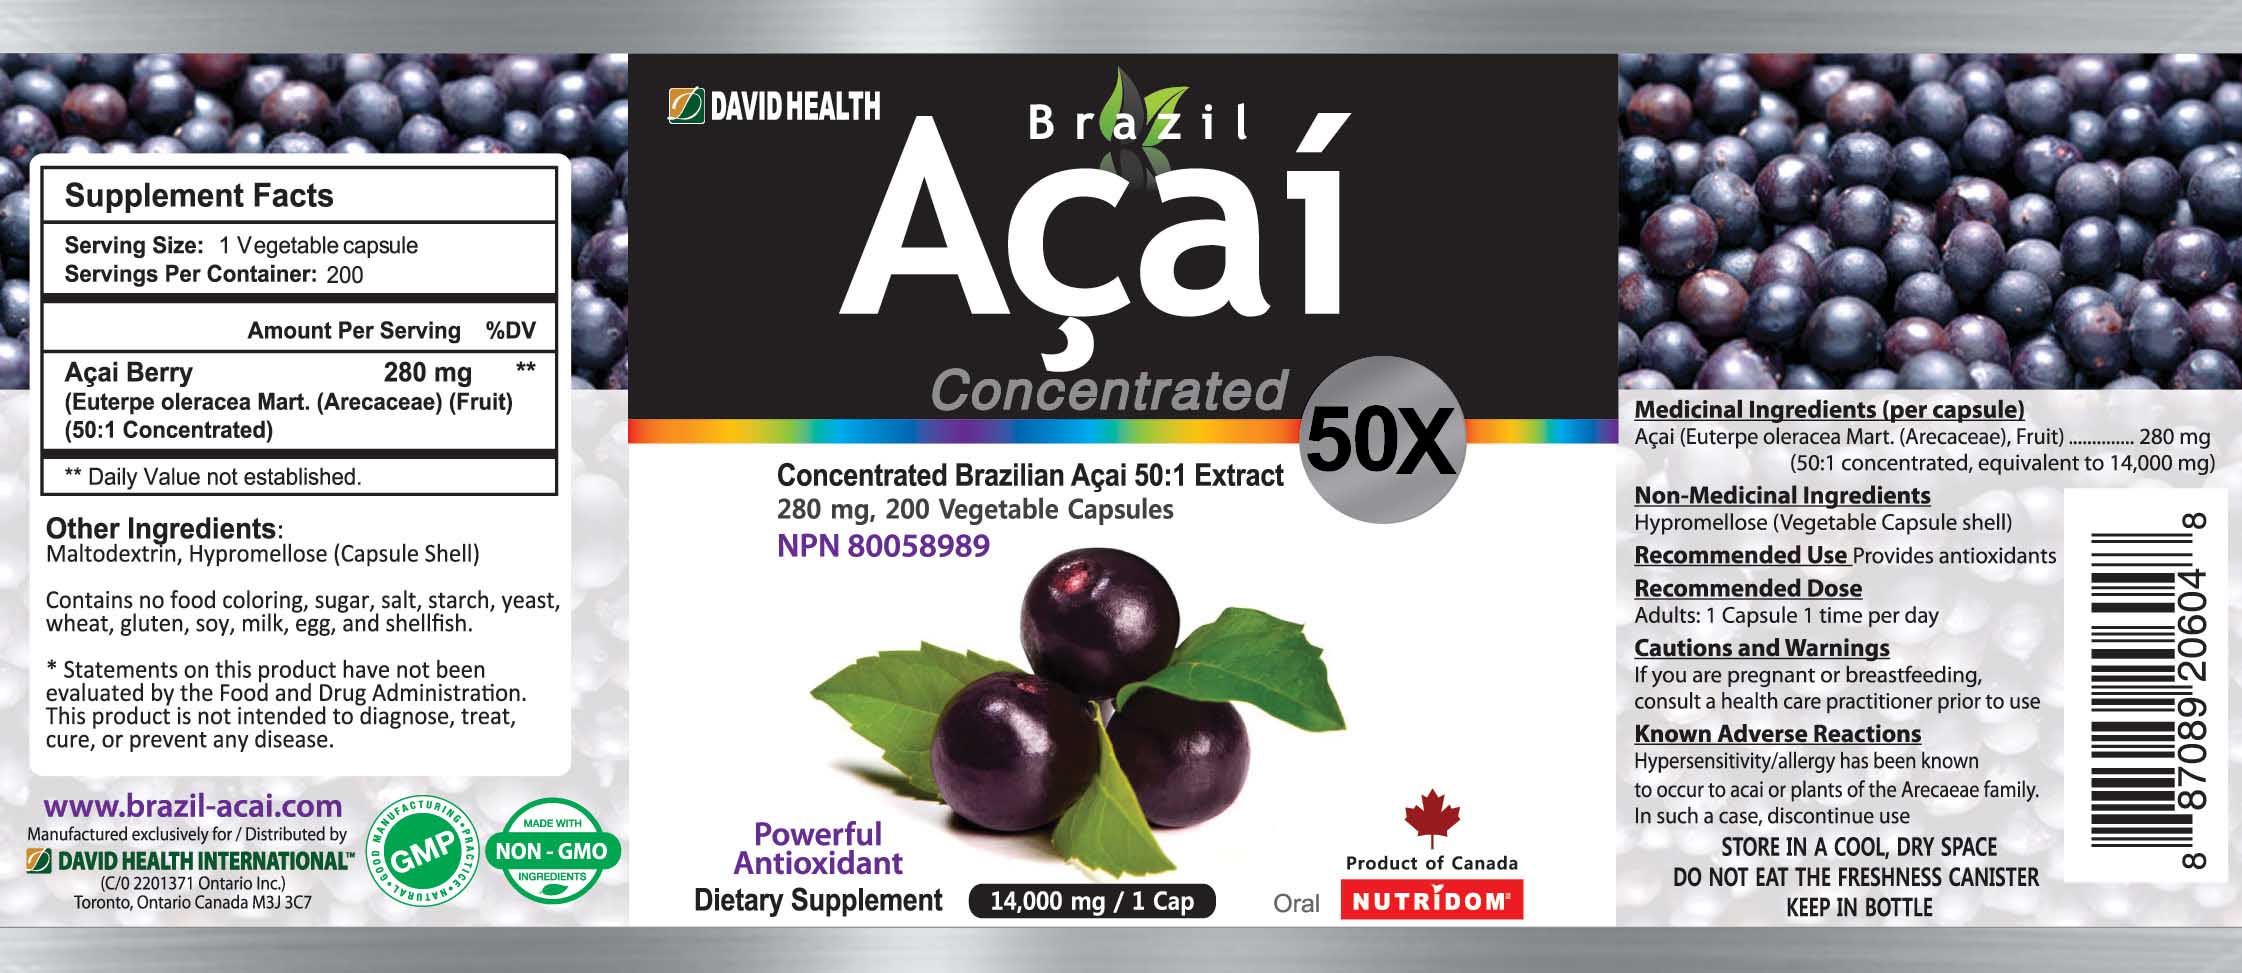 Brazil Acai 50X Concentrated (200 Caps) - Lifestyle Markets